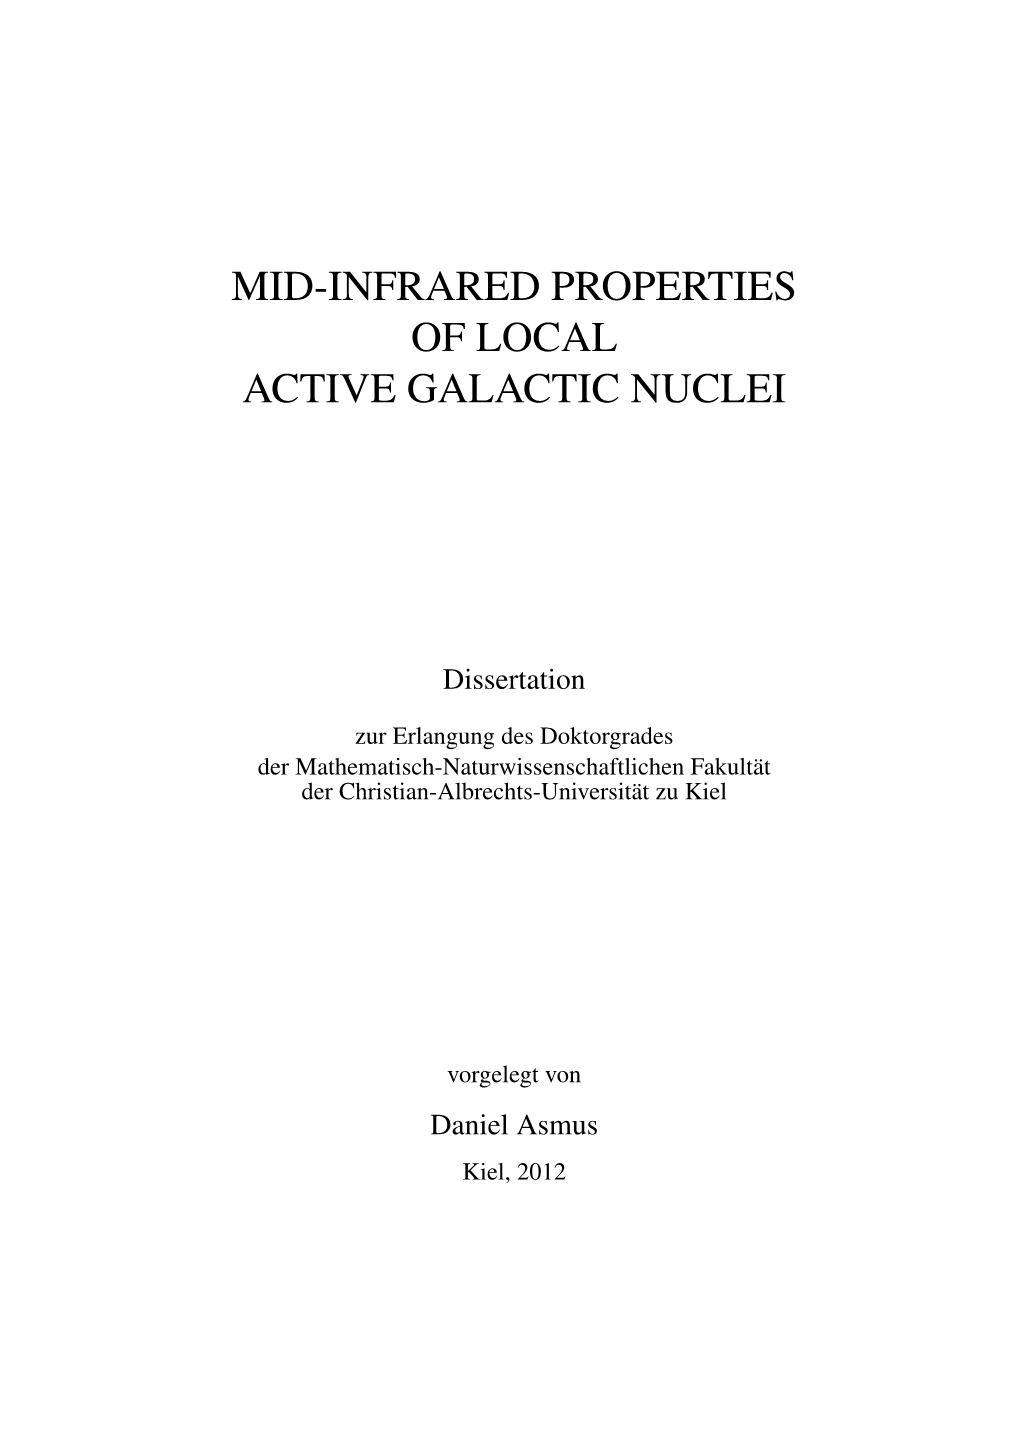 Mid-Infrared Properties of Local Active Galactic Nuclei